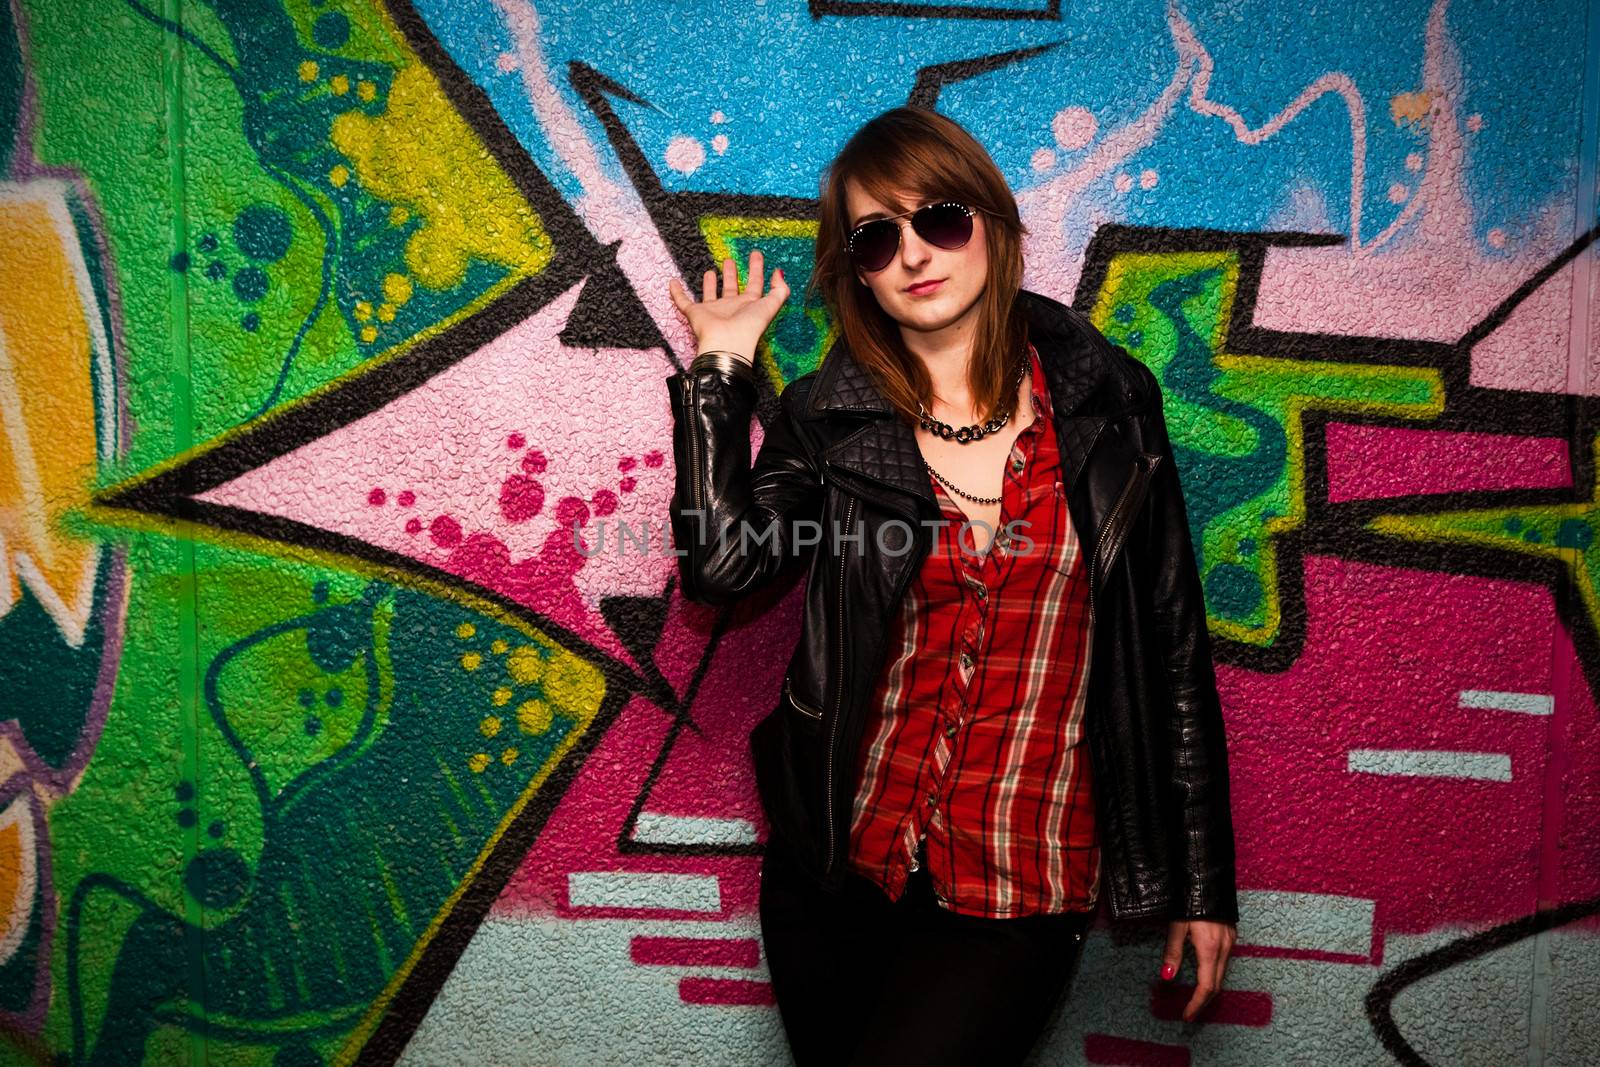 Fashionable girl and colorful graffiti wall by photocreo